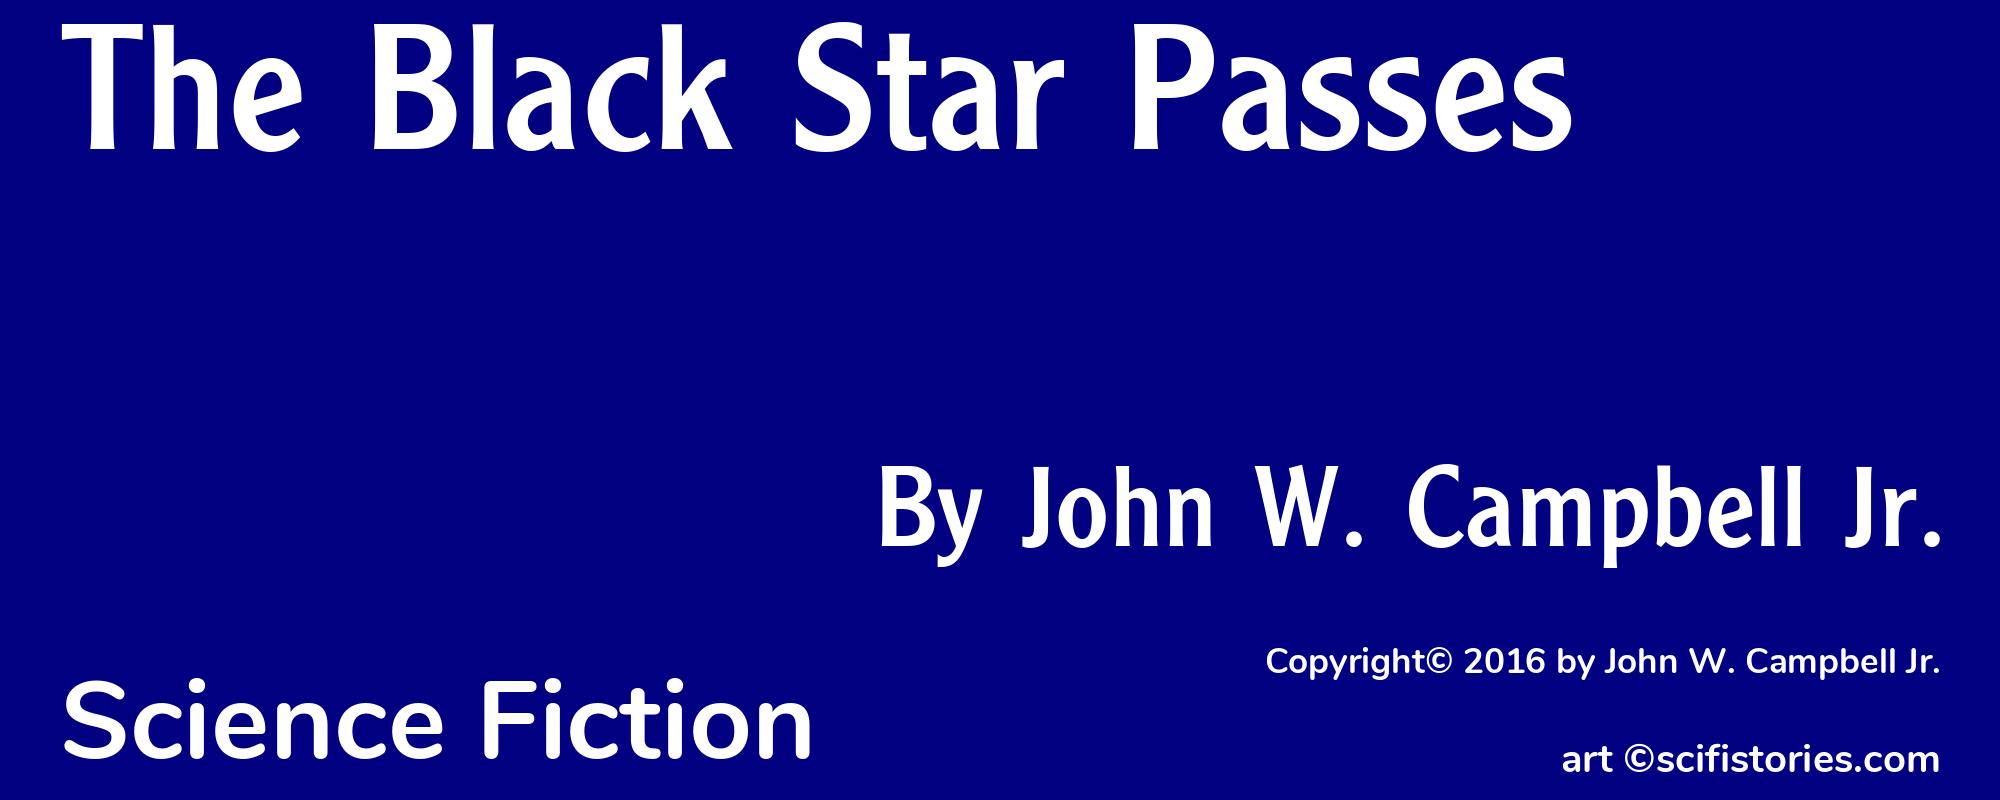 The Black Star Passes - Cover